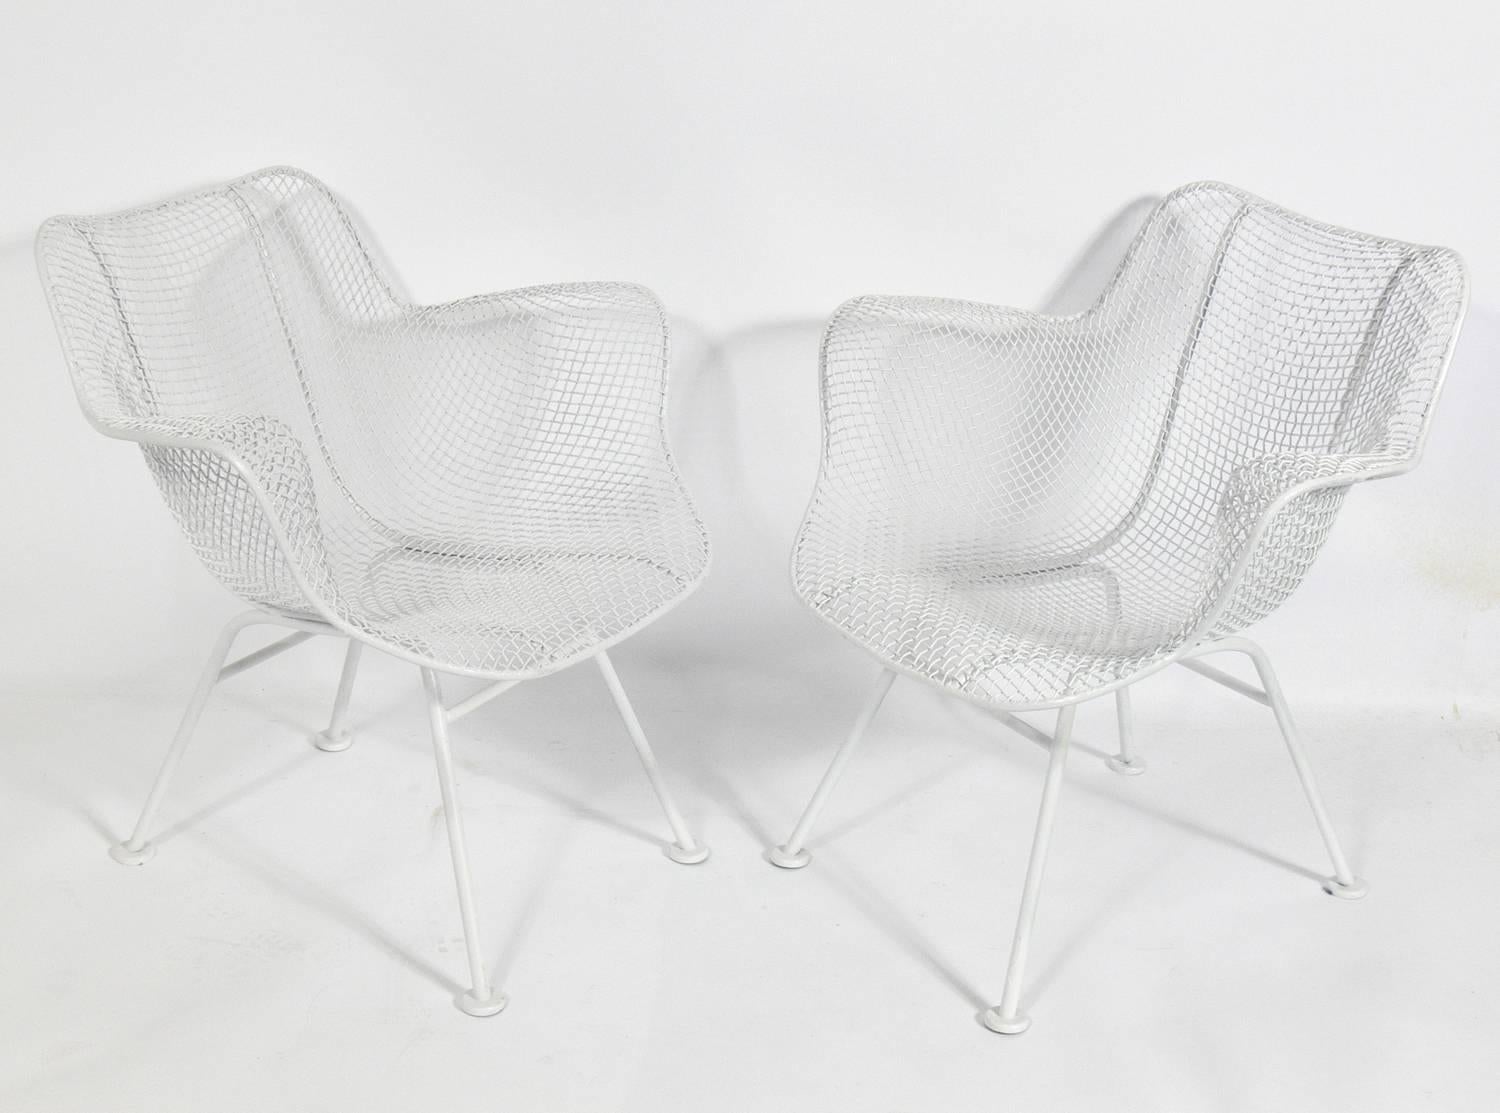 Set of four Sculptura chairs, designed for the Woodard Furniture Company, American, circa 1960s. They are a versatile size and can be used as dining or lounge chairs. They have been repainted in white.